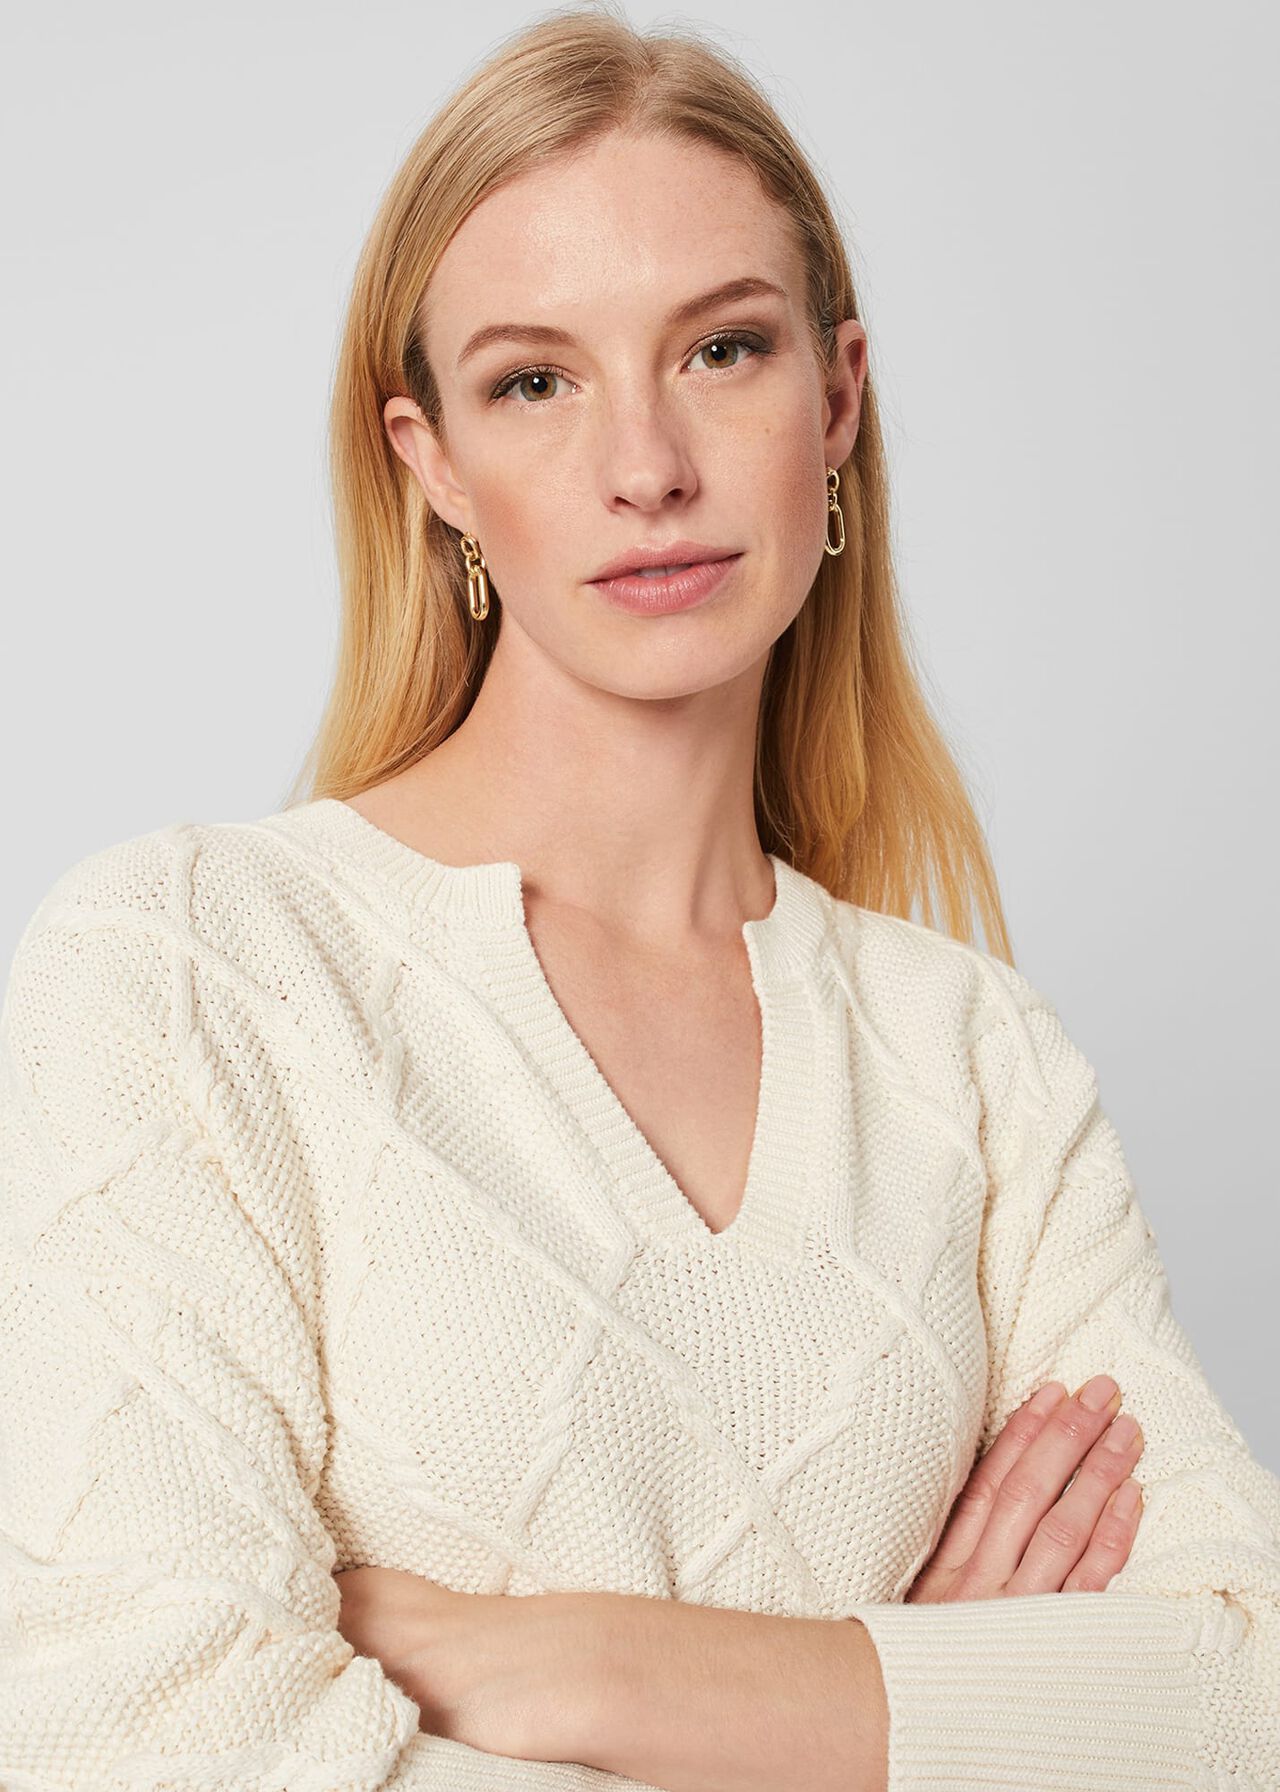 Cianna Cotton Sweater, Ivory, hi-res